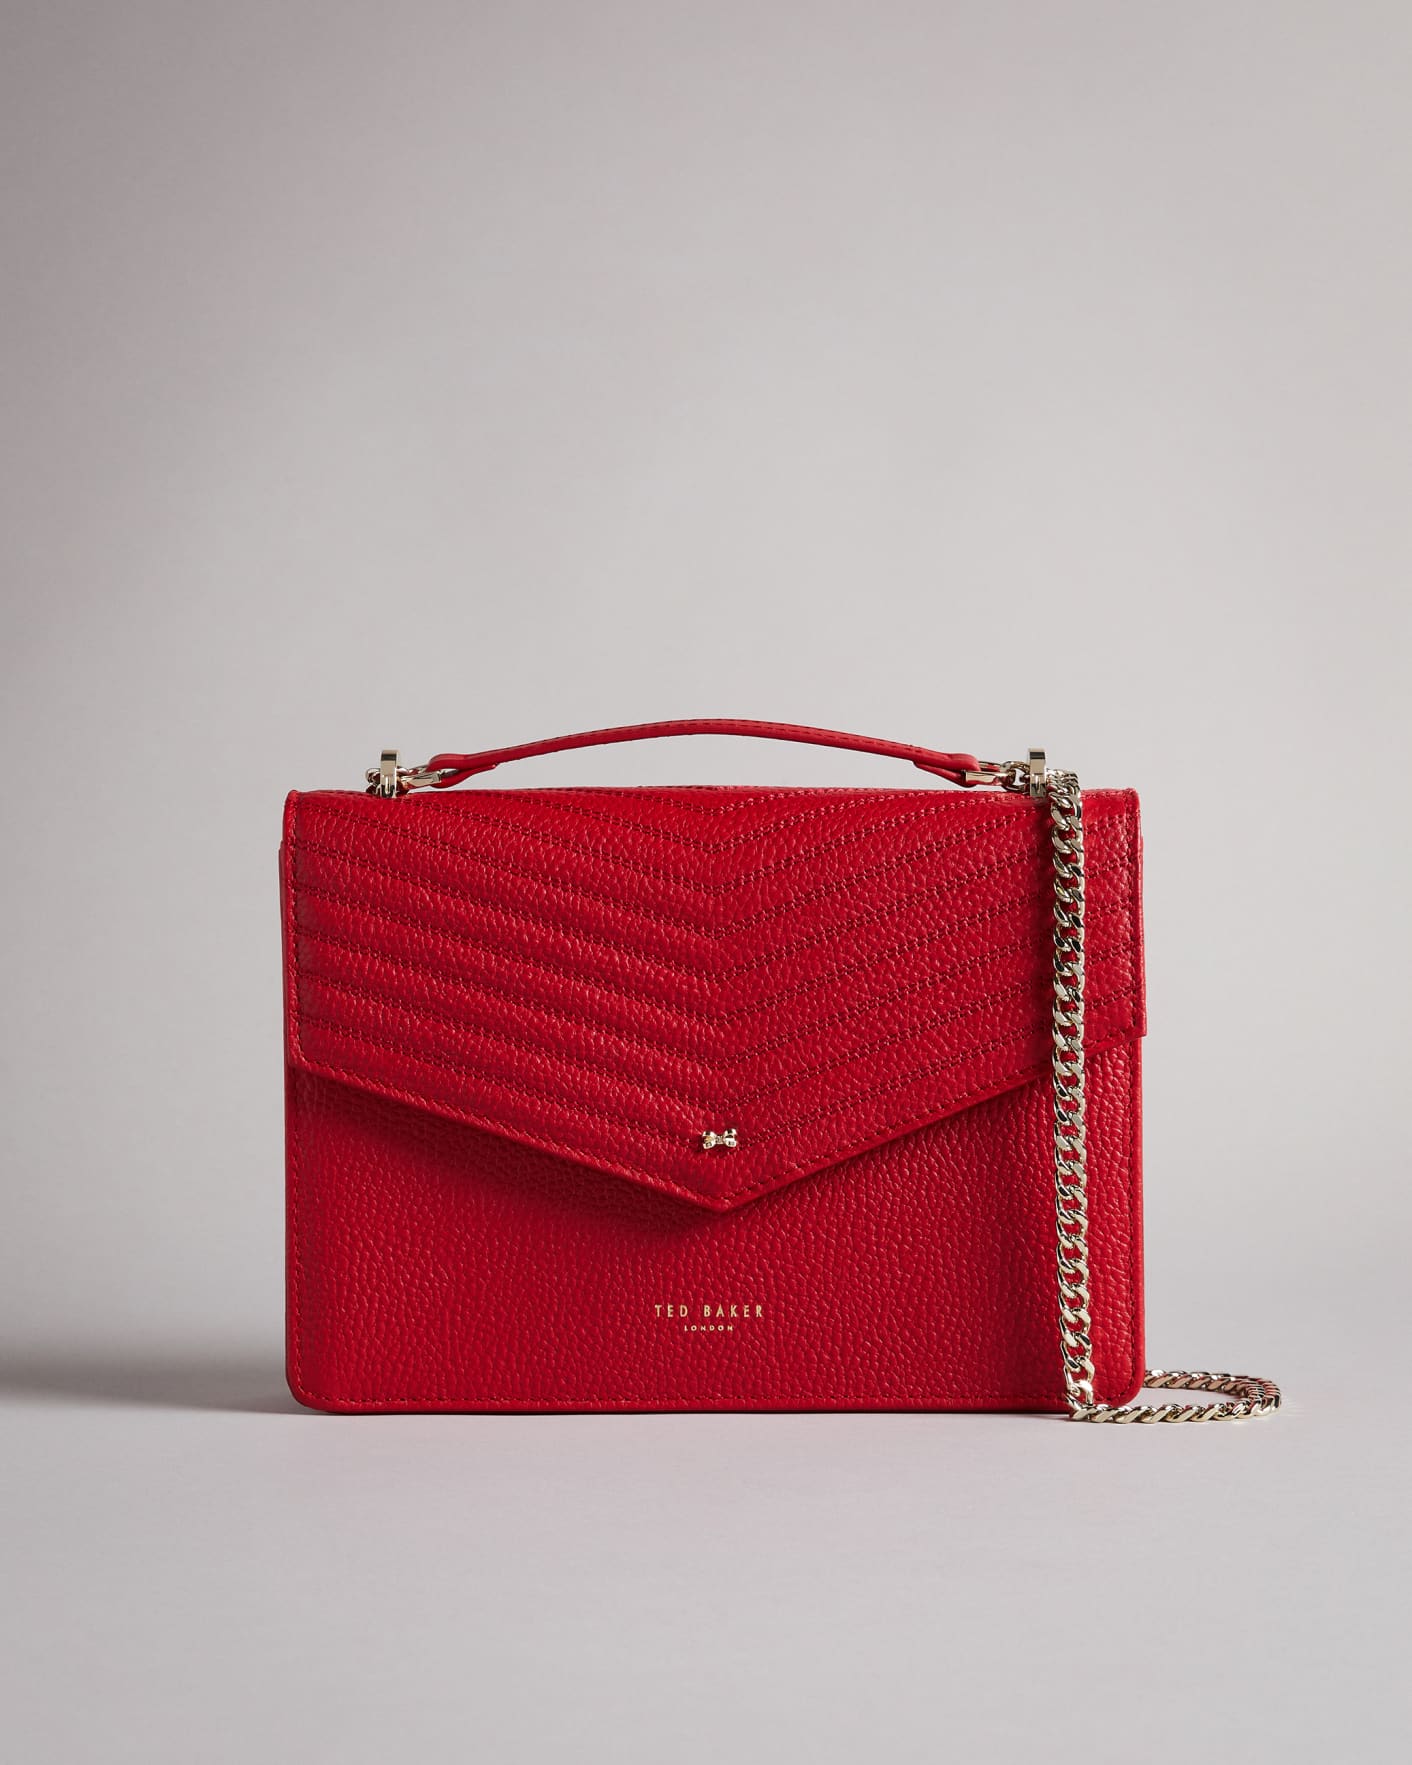 KALILA - RED | Bags | Ted Baker US | Ted Baker (US)